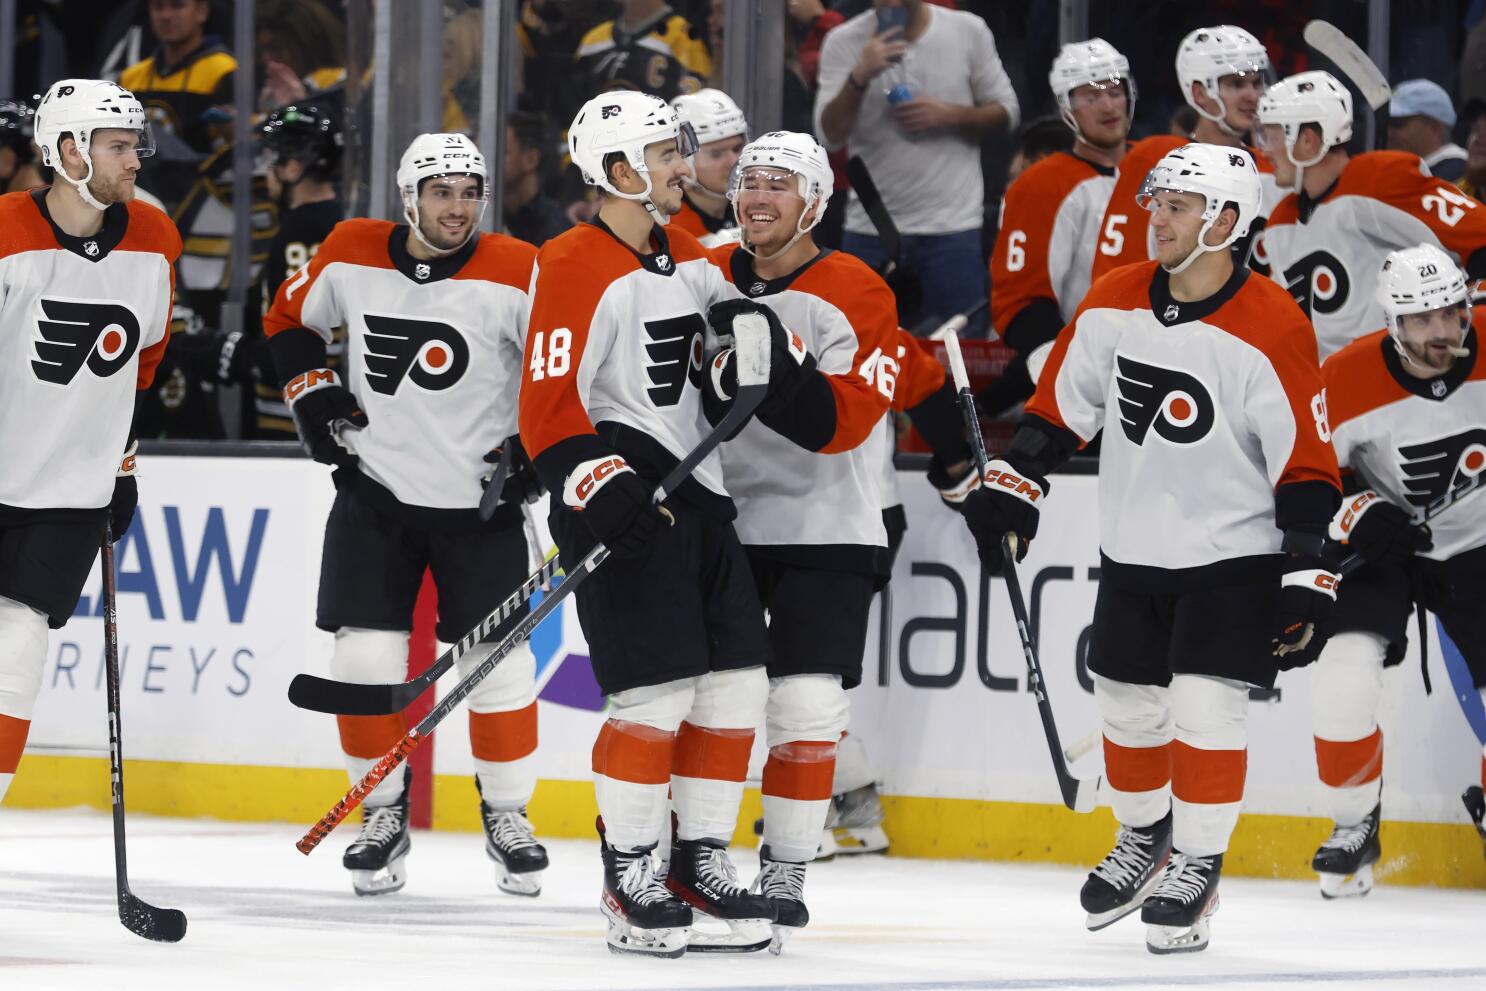 Philadelphia Flyers: Ivan Provorov is the key to success